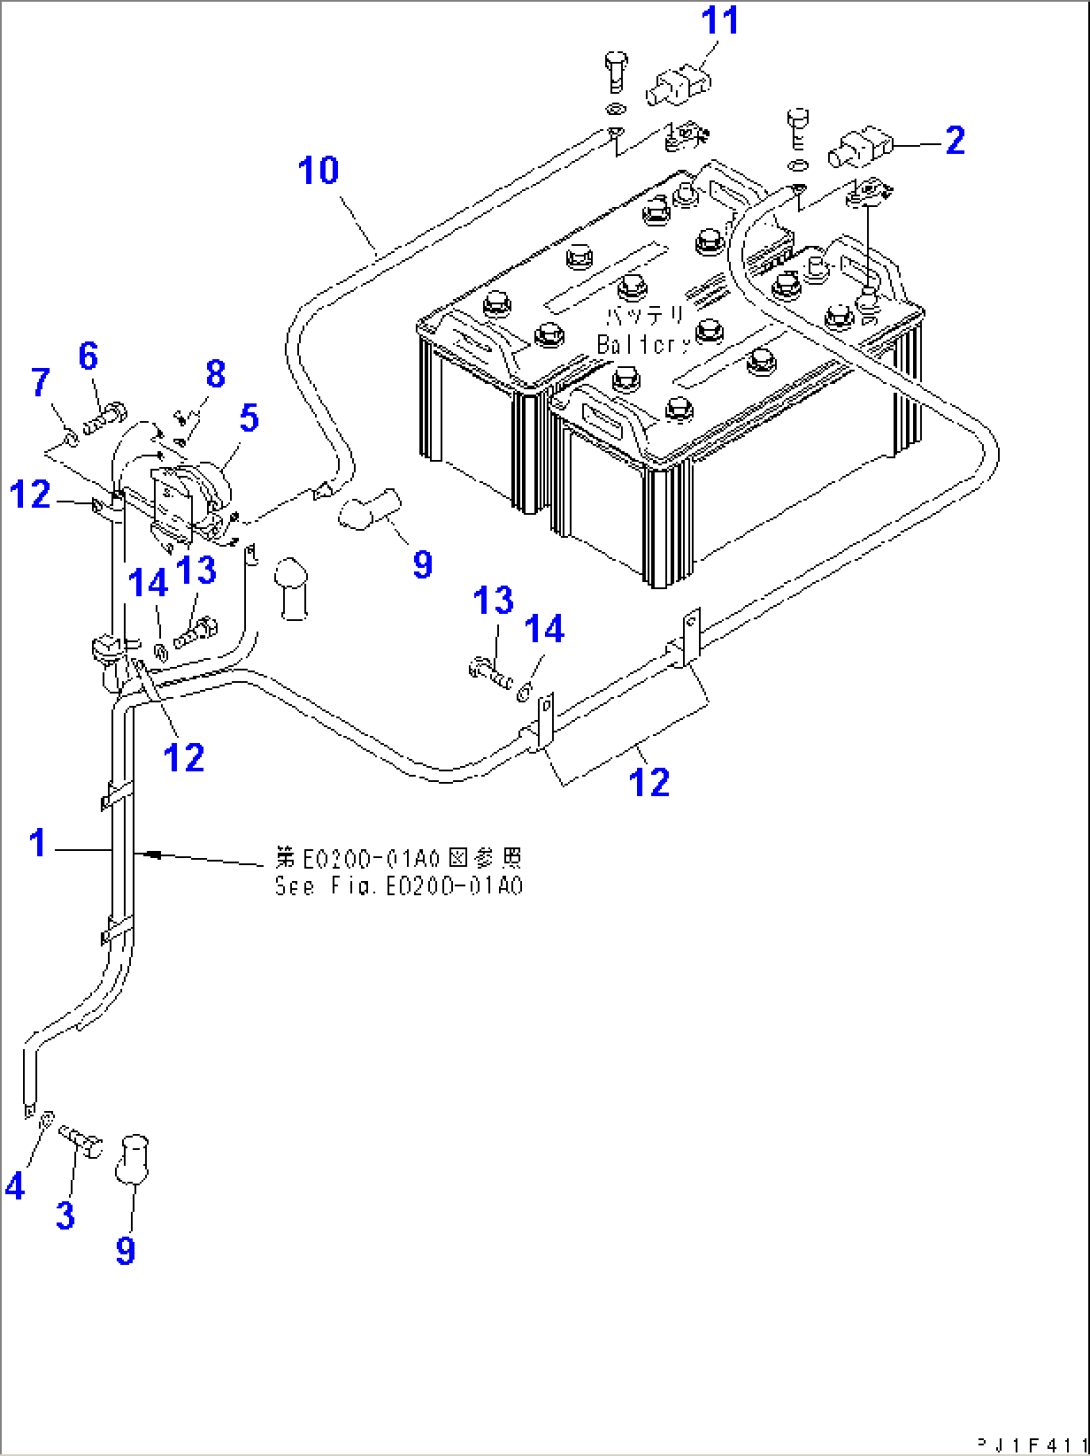 ELECTRICAL SYSTEM (BATTERY HARNESS)